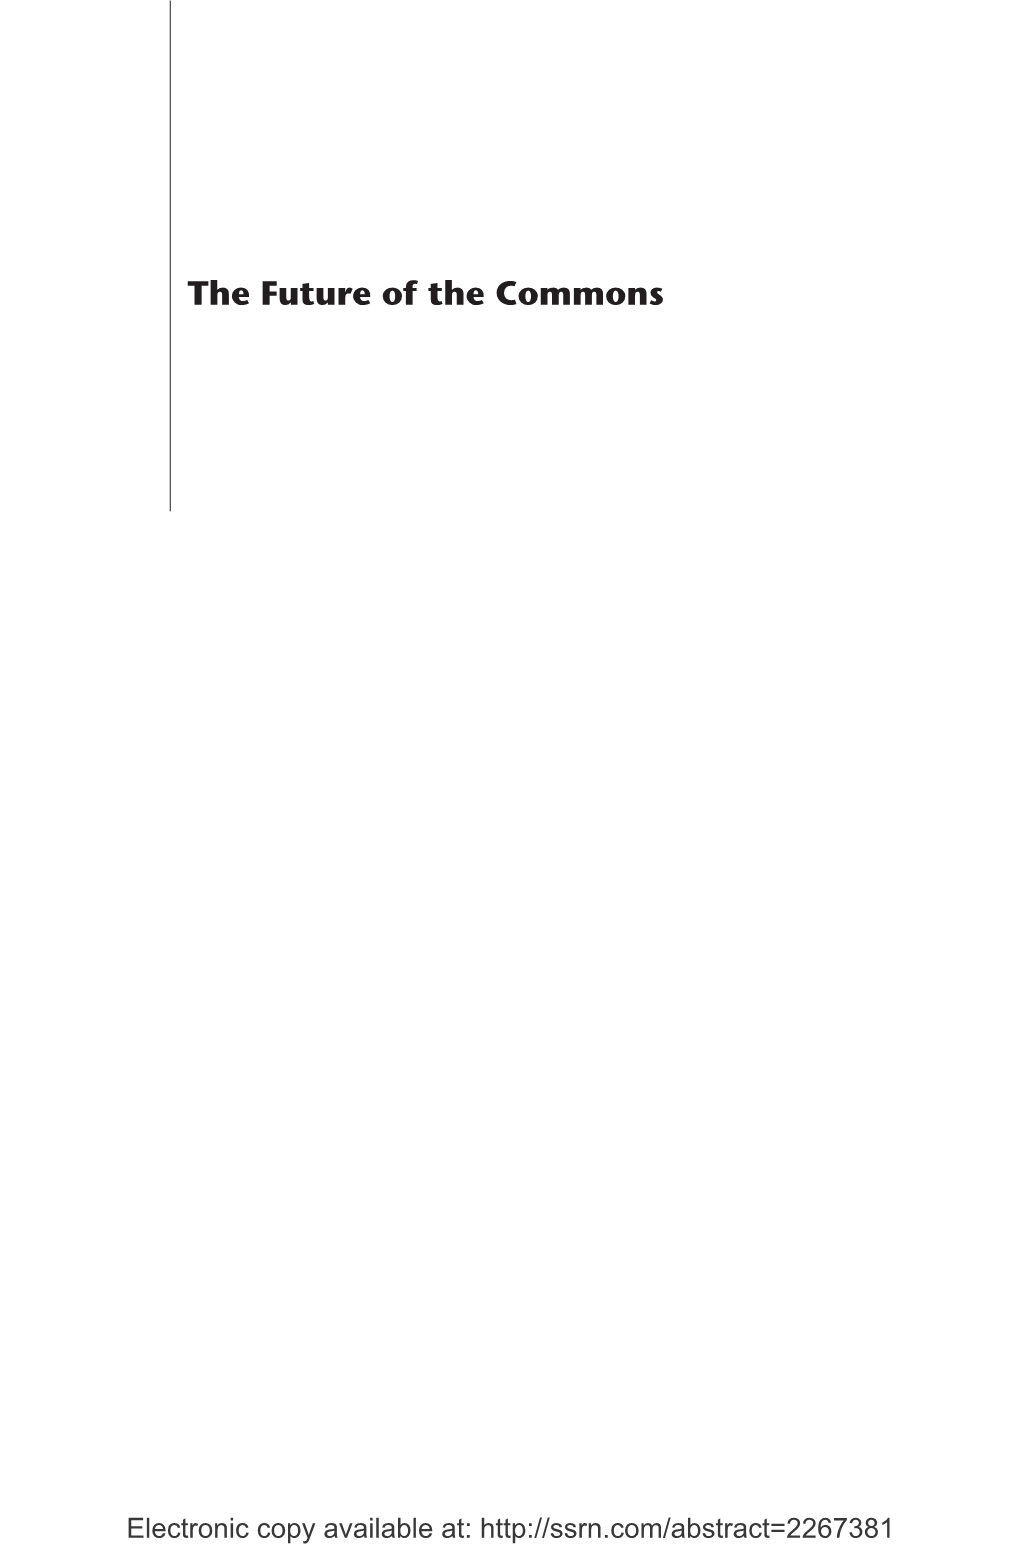 The Future of the Commons